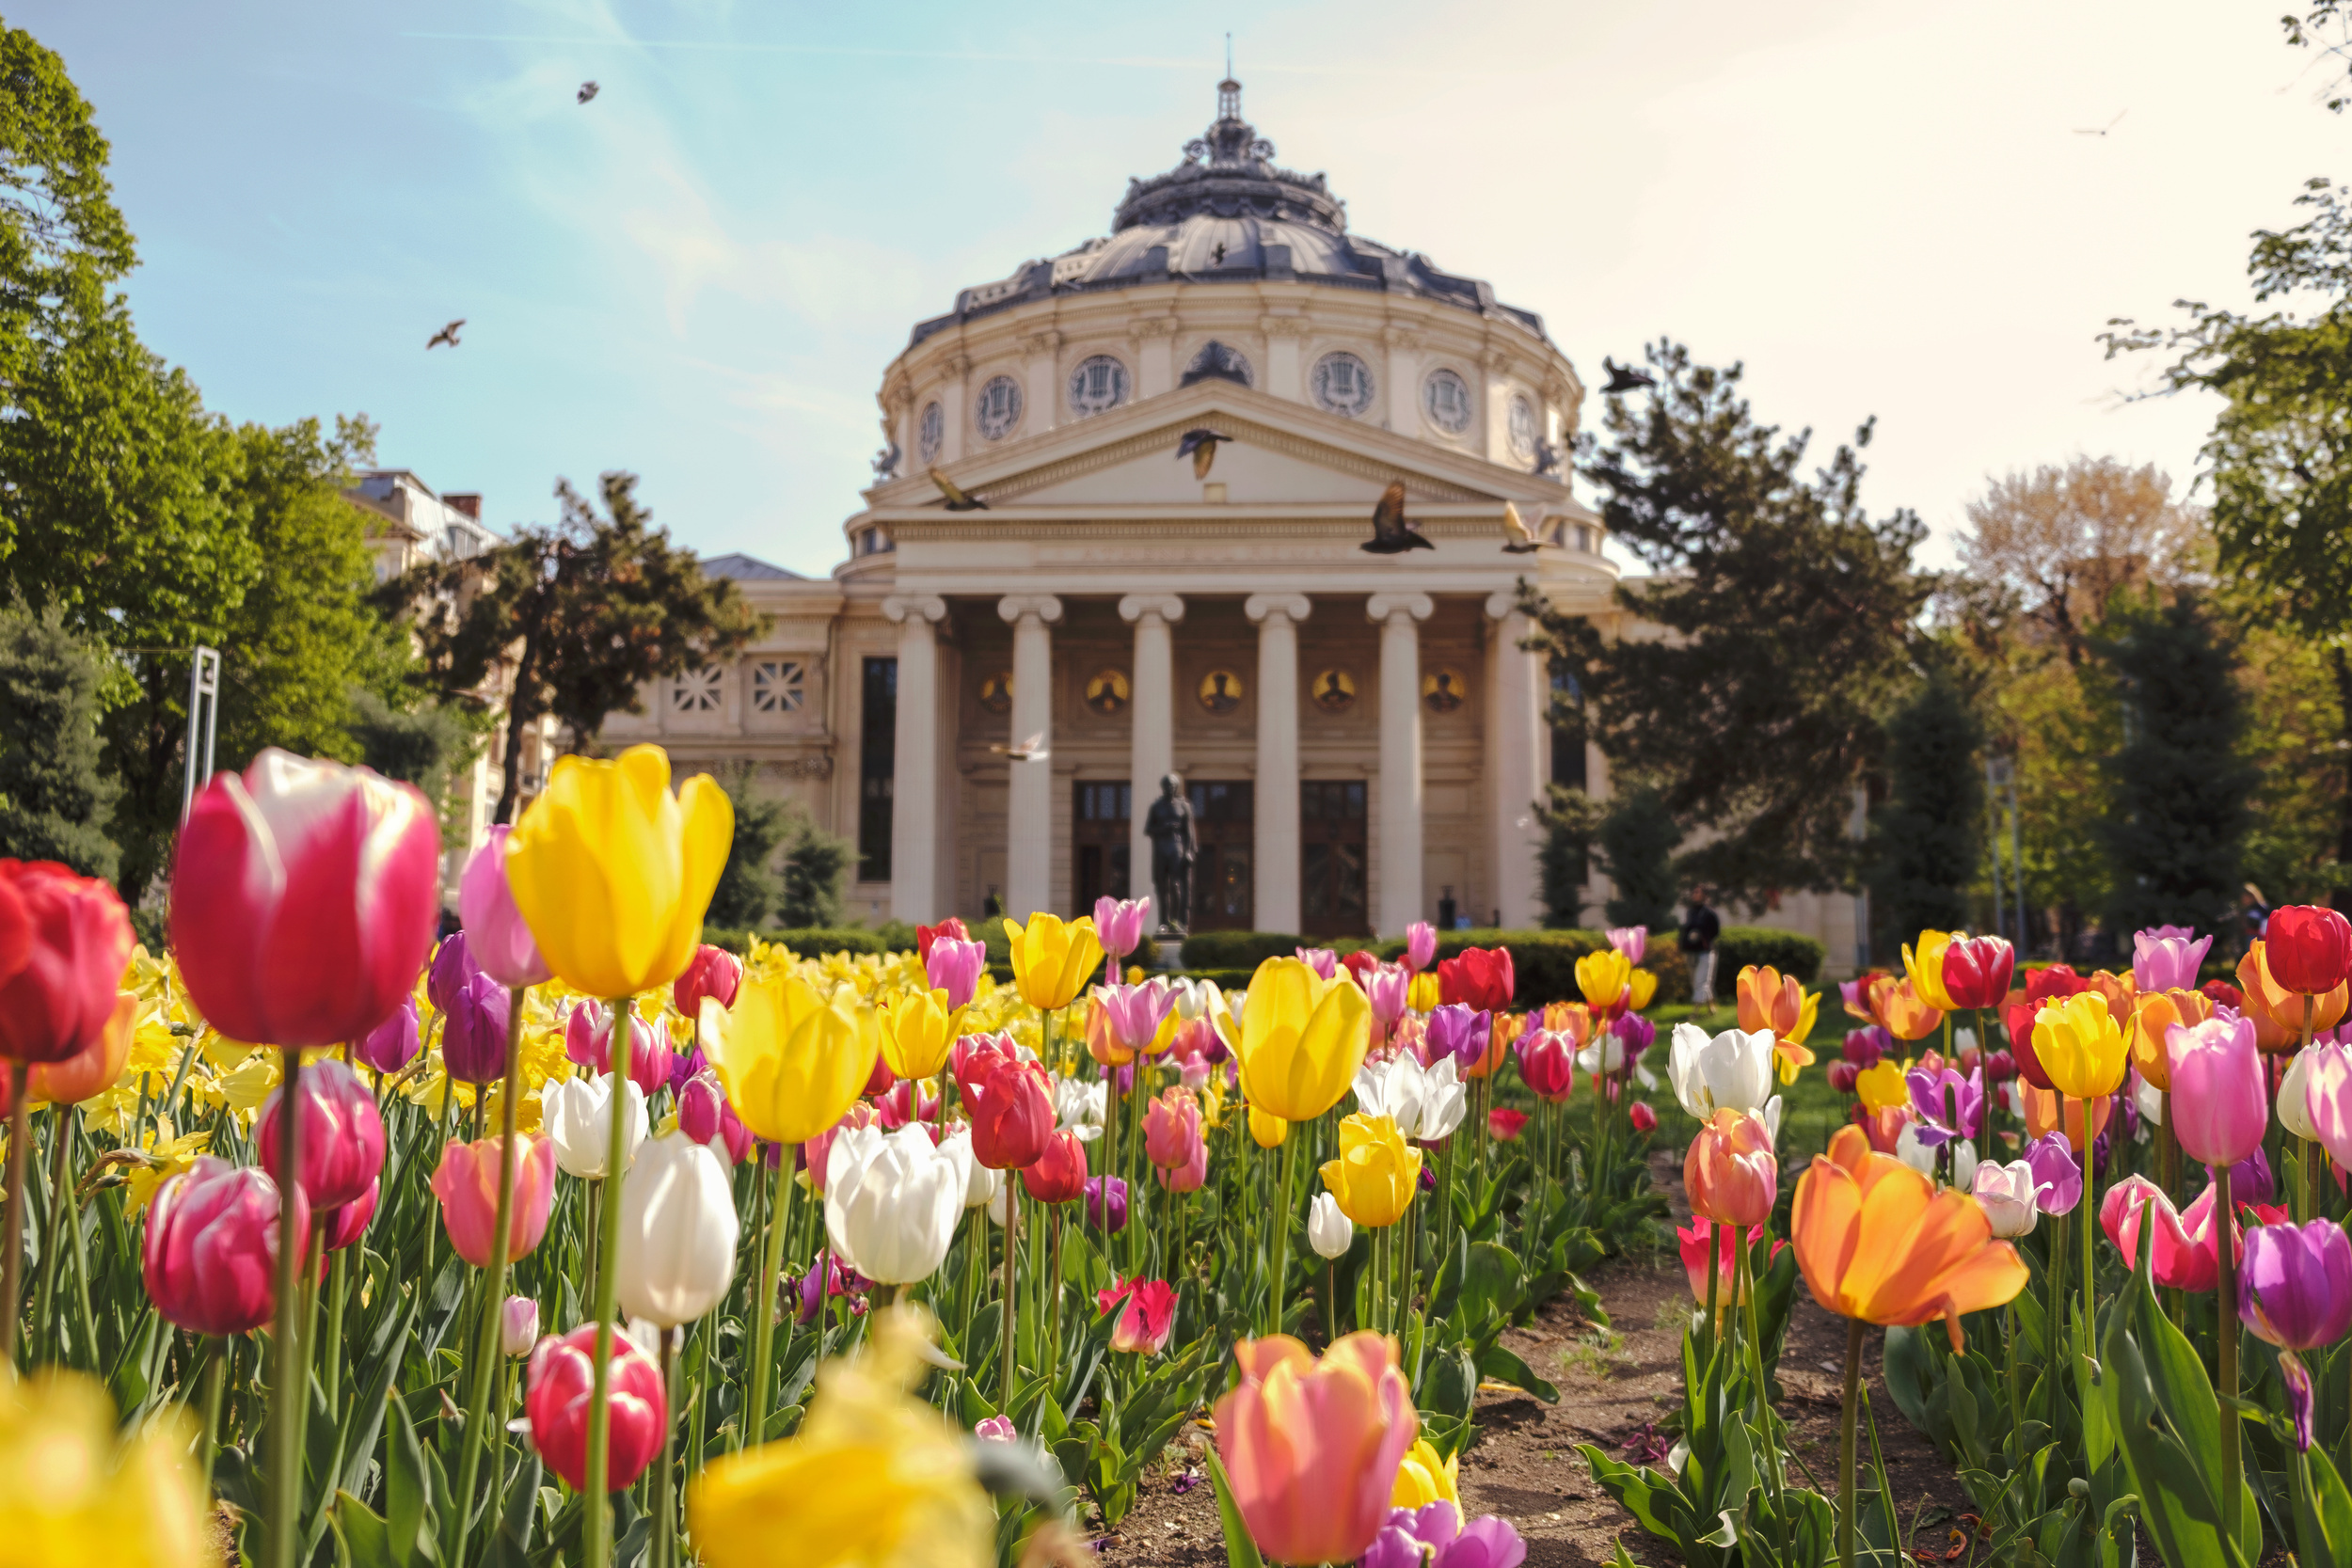 <p>Romania is far from the tourist trail, and that also goes for the capital city. However, Bucharest makes for a nice little spring visit. The temps are pleasantly in the 70s, perfect for strolling streets best explored on foot. </p><p>You may also like: <a href='https://www.yardbarker.com/lifestyle/articles/20_foolproof_crockpot_dump_recipes_you_can_try_030124/s1__39117815'>20 foolproof crockpot dump recipes you can try</a></p>